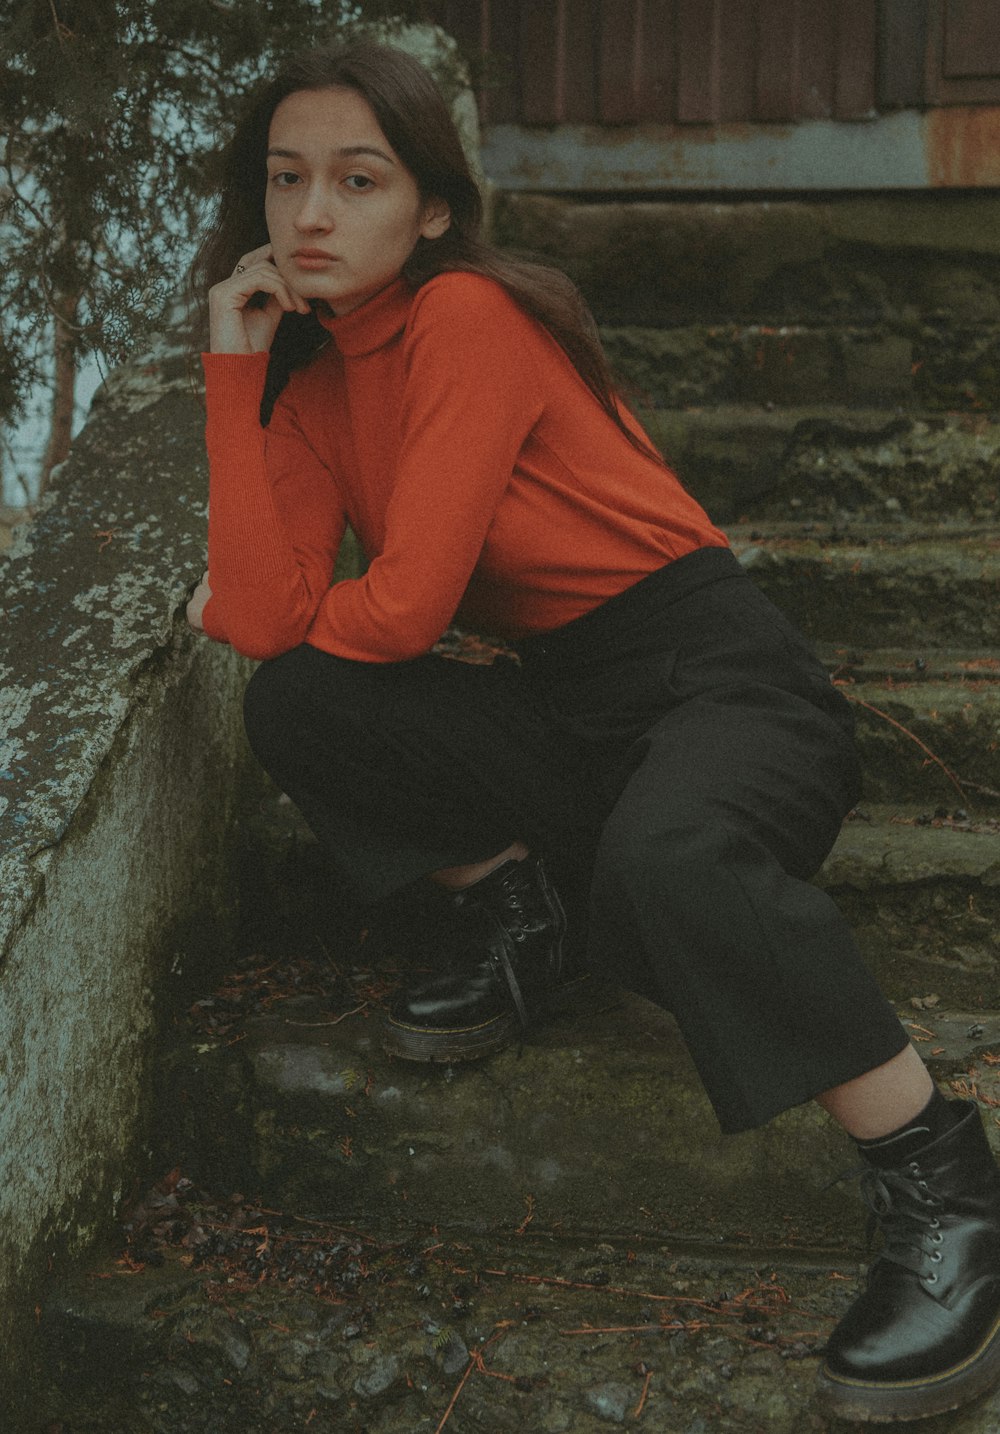 a woman in a red shirt and black pants sitting on steps